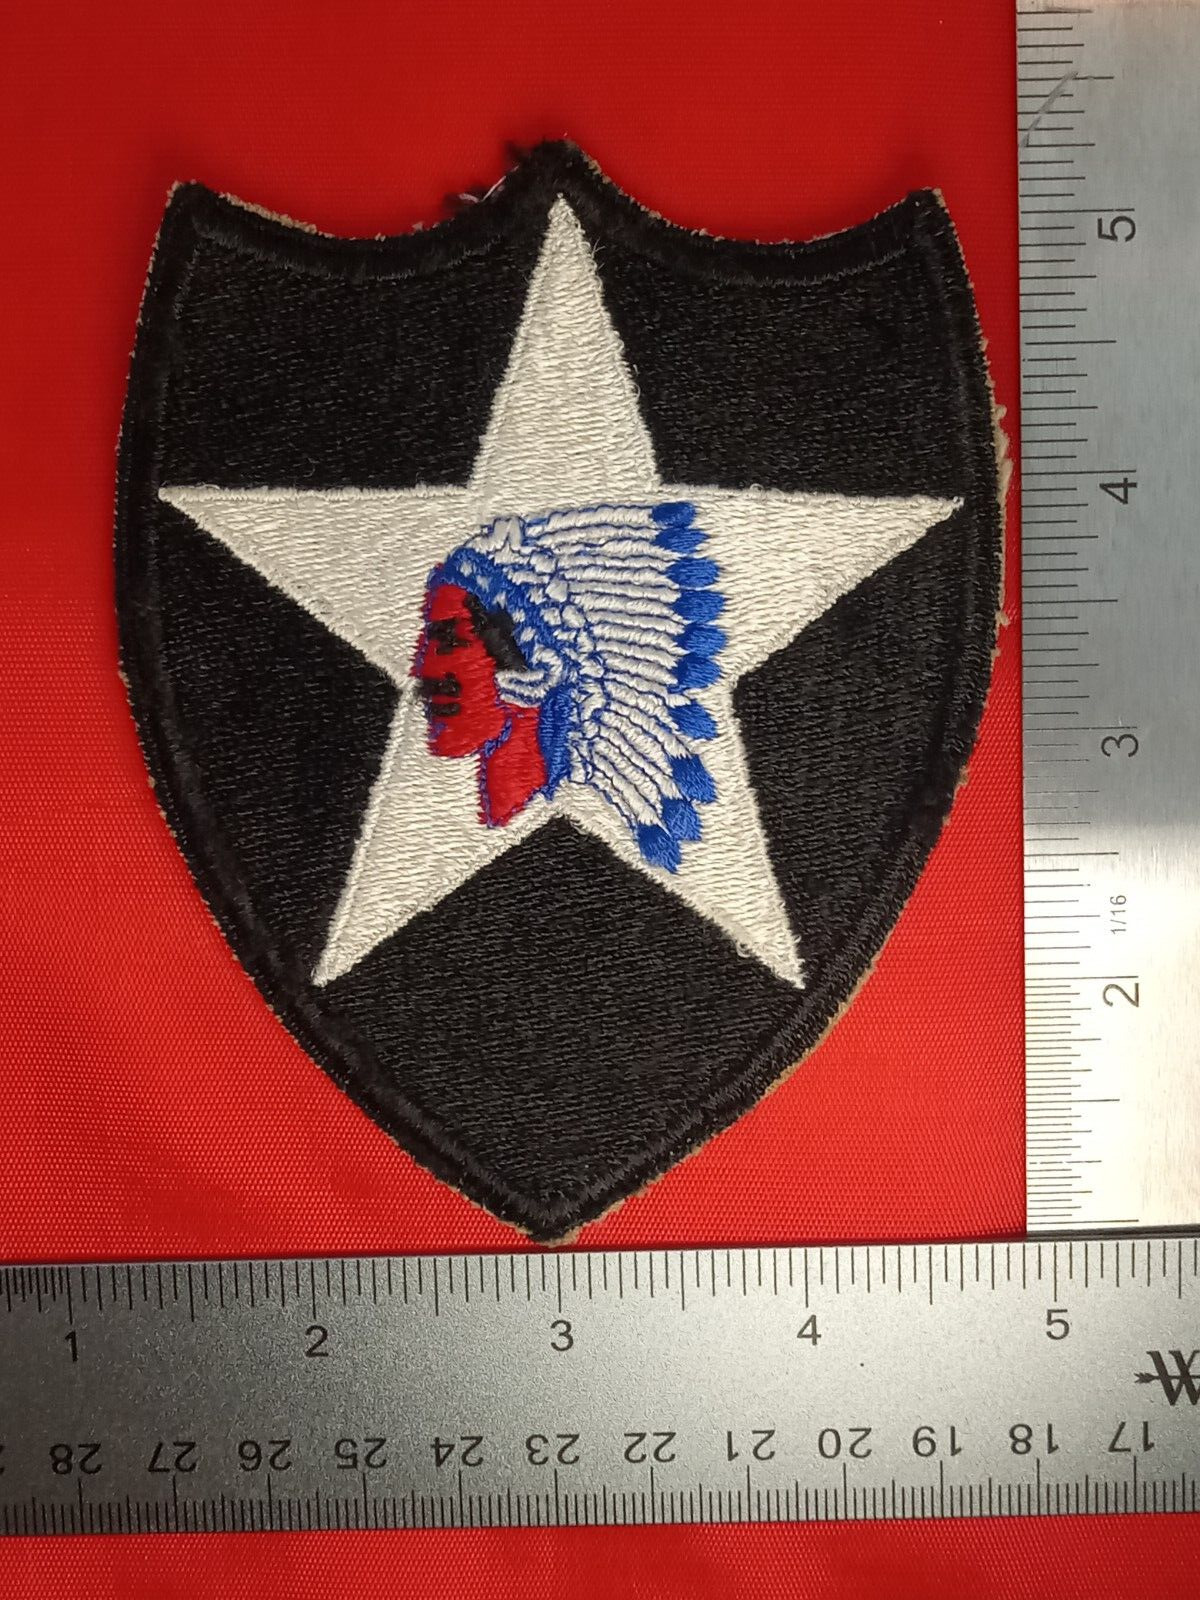 US Army Authentic WW2 Era 2nd Infantry Div. Vintage Military Patch No Glow